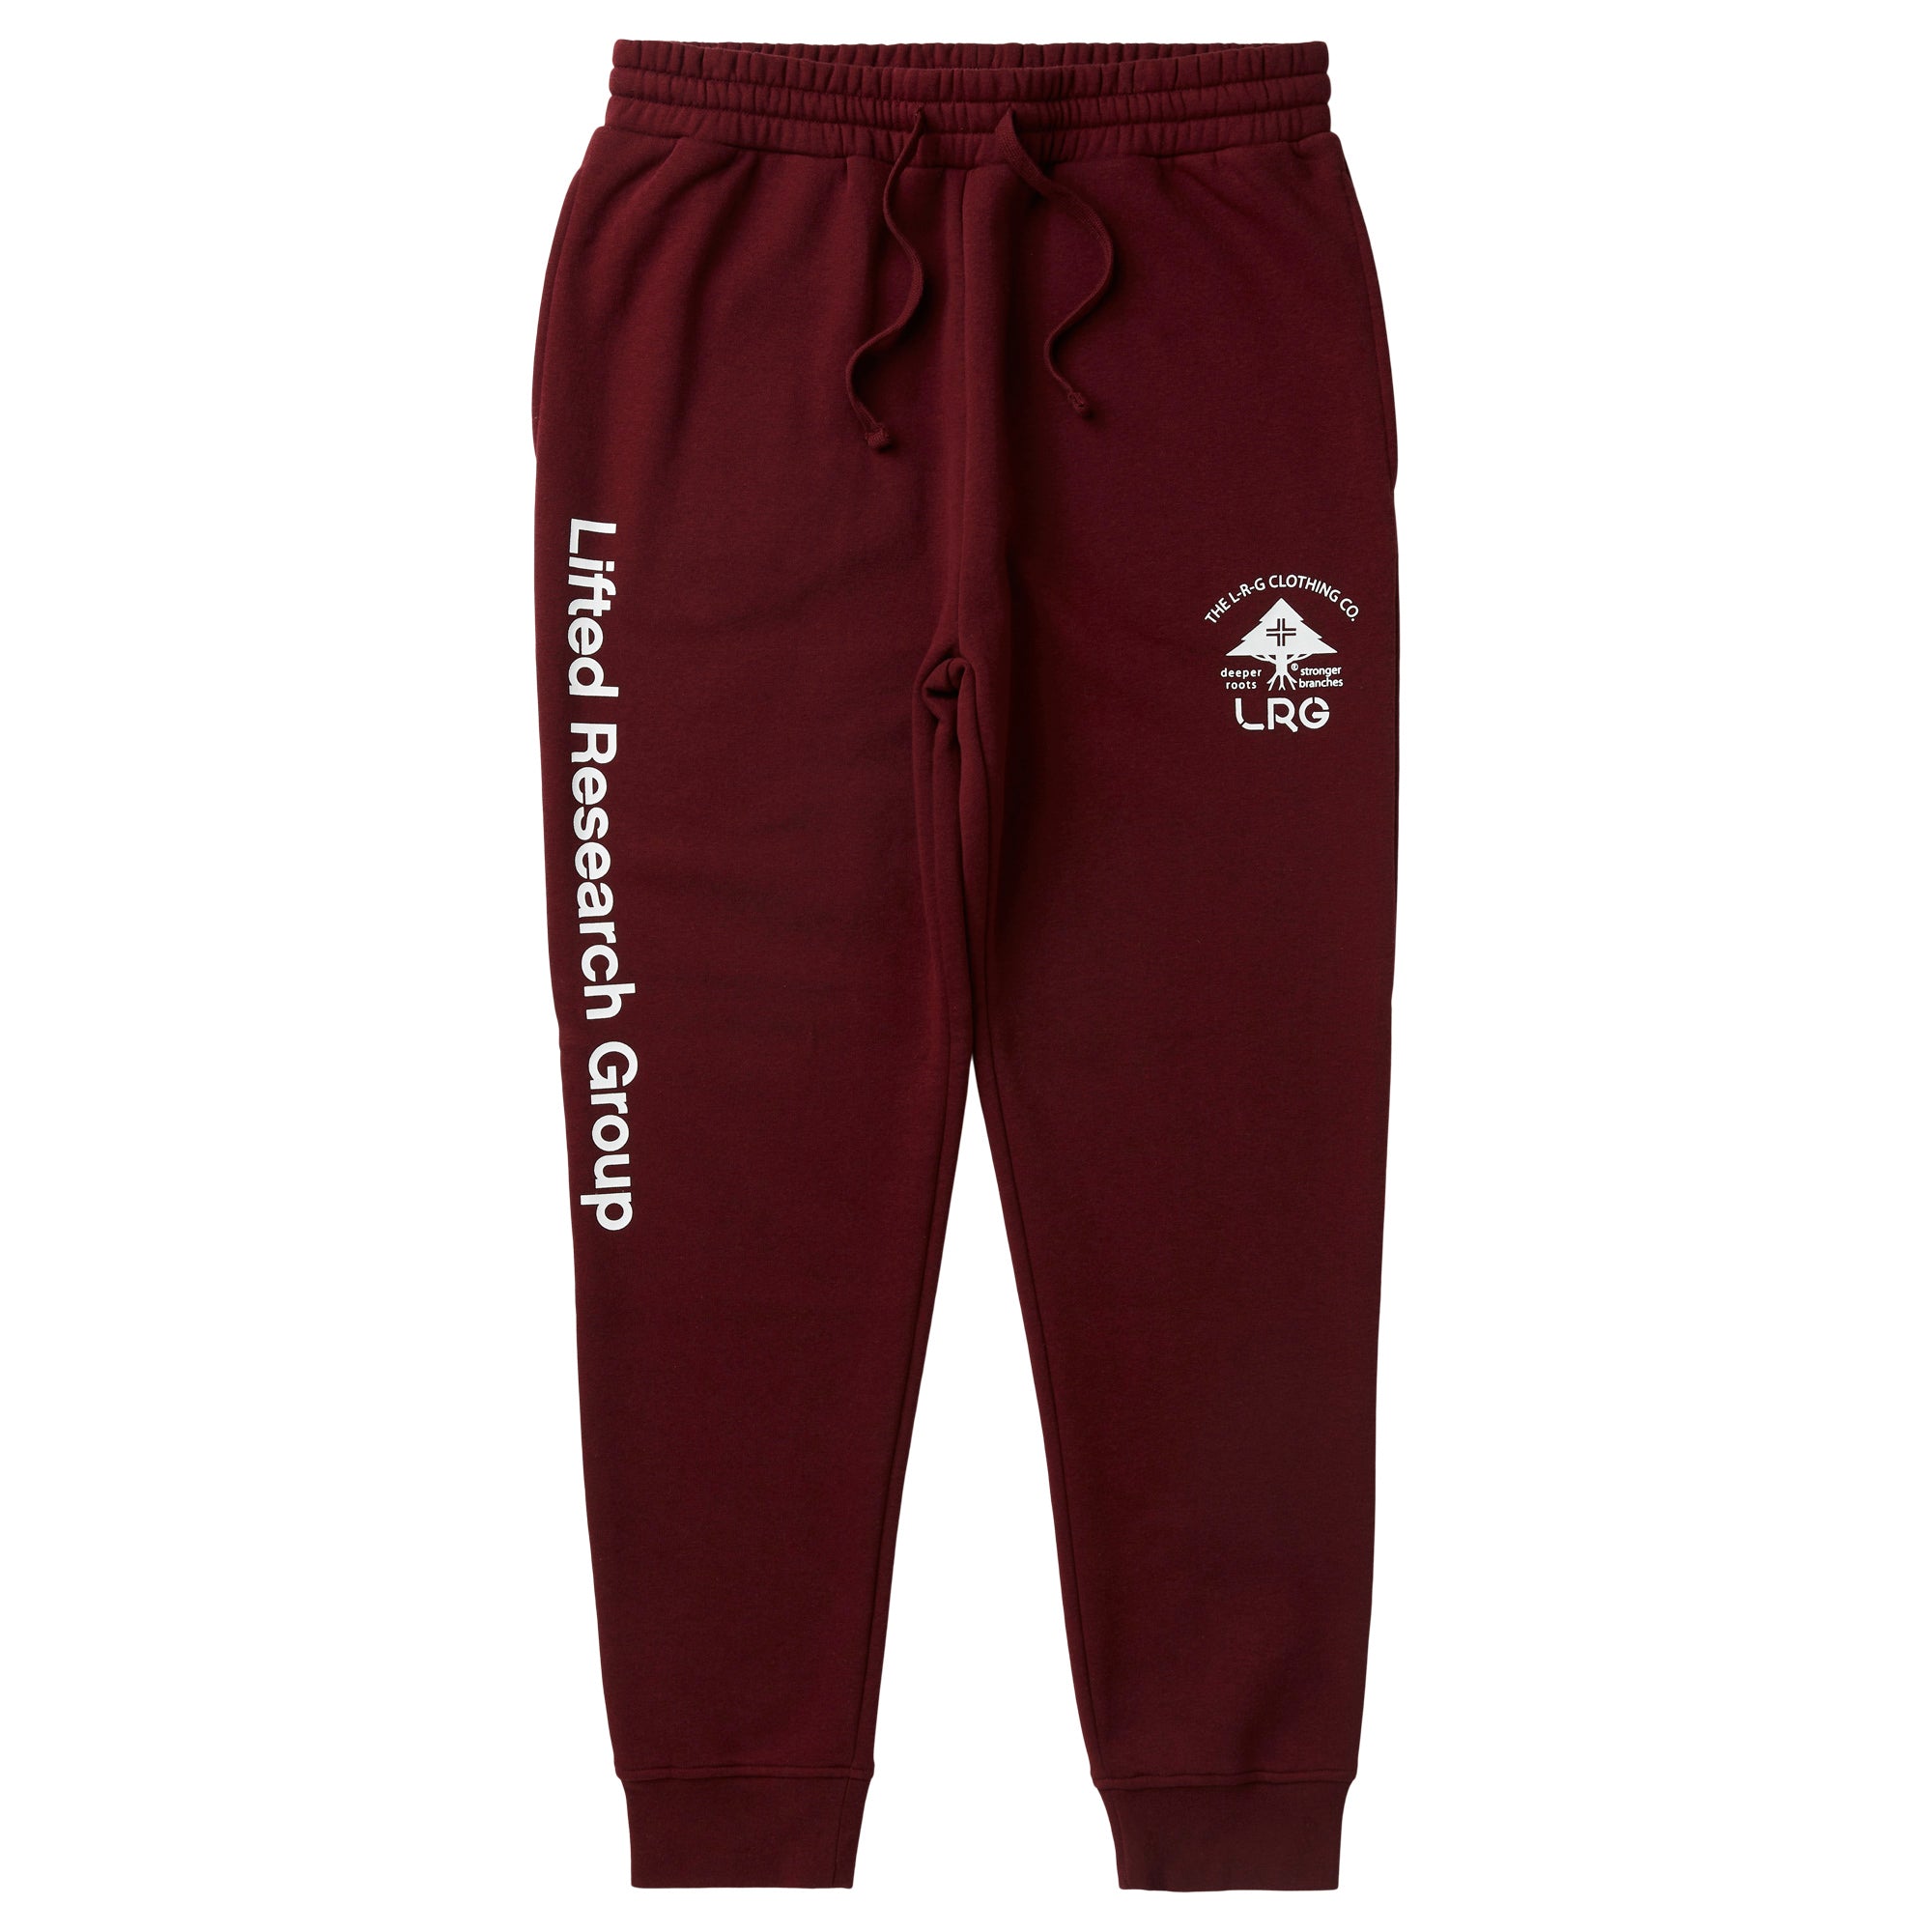 Roots just launched limited edition sweats for International